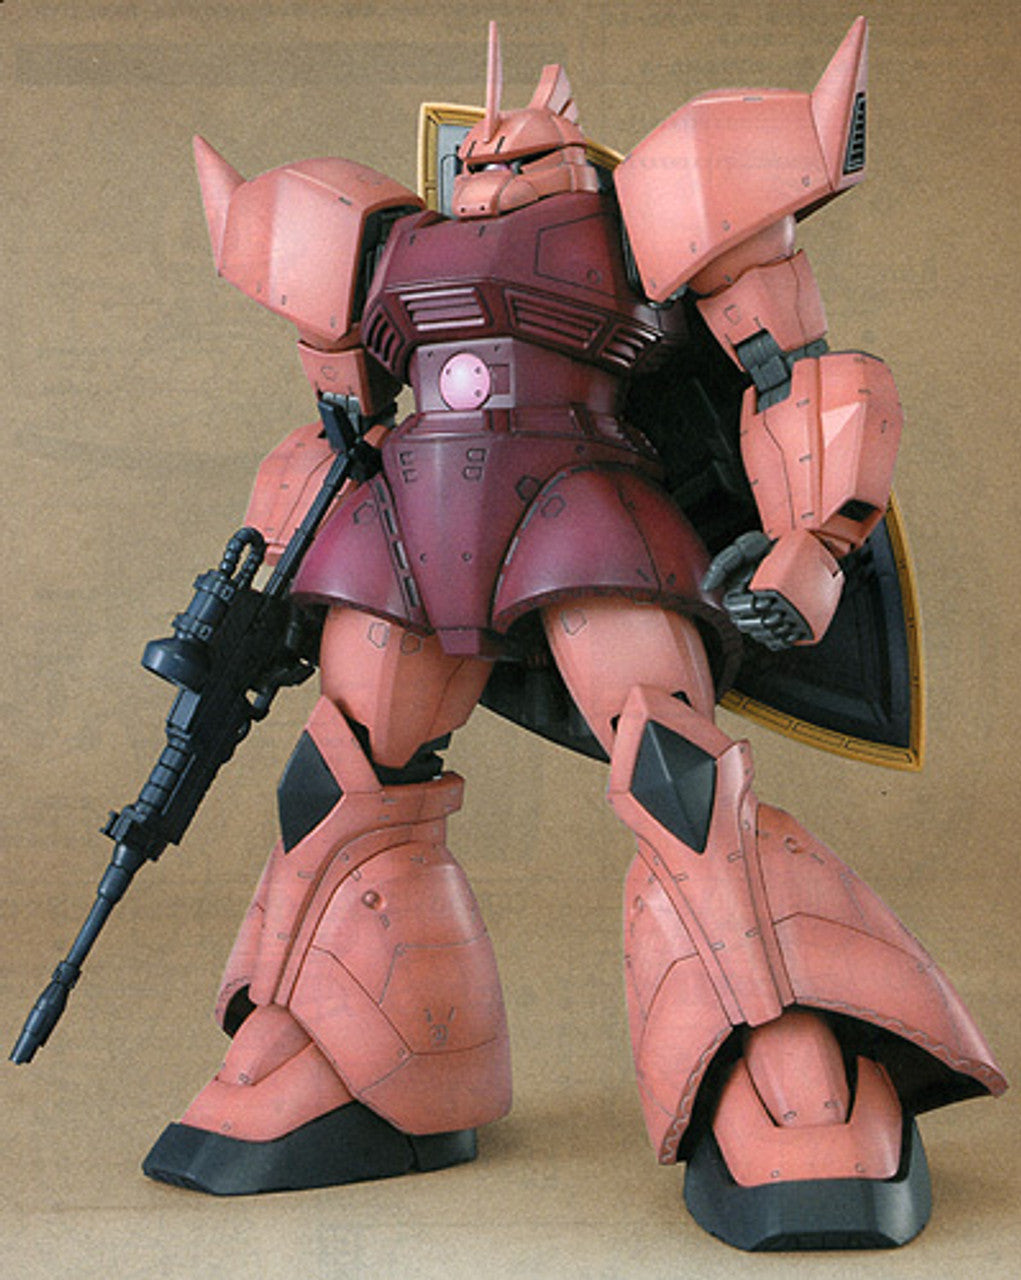 Bandai Master Grade MS-14S Gelgoog Ver.2.0 Principality of Zeon Char Aznable's Customize Mobile Suit 1:100 Scale